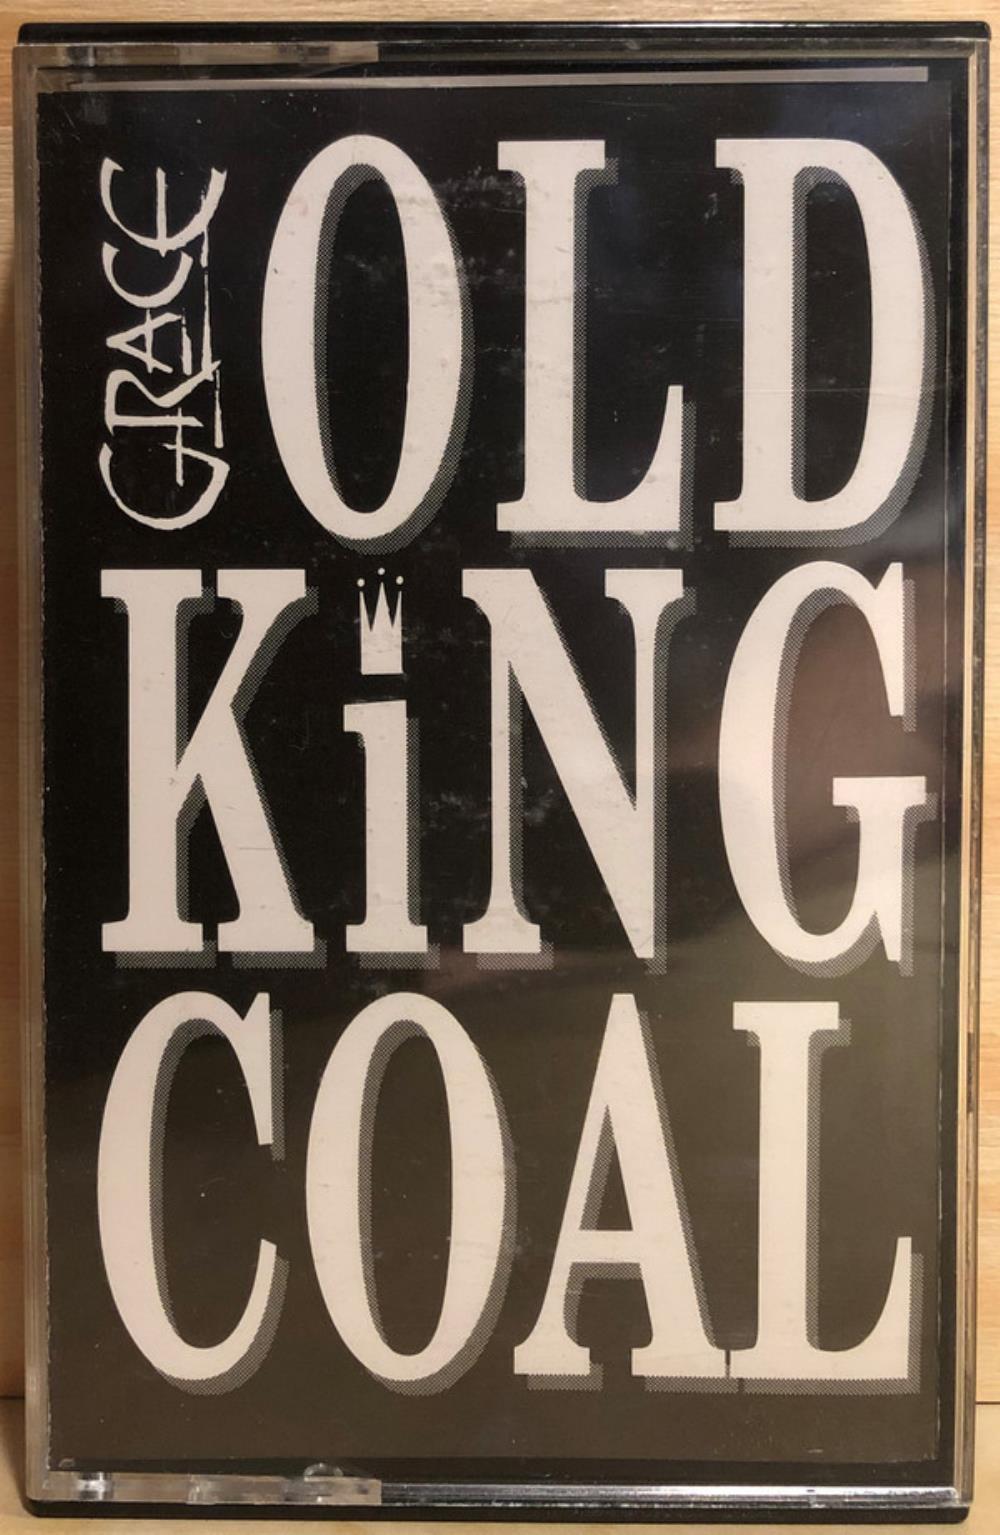 Grace Old King Coal album cover